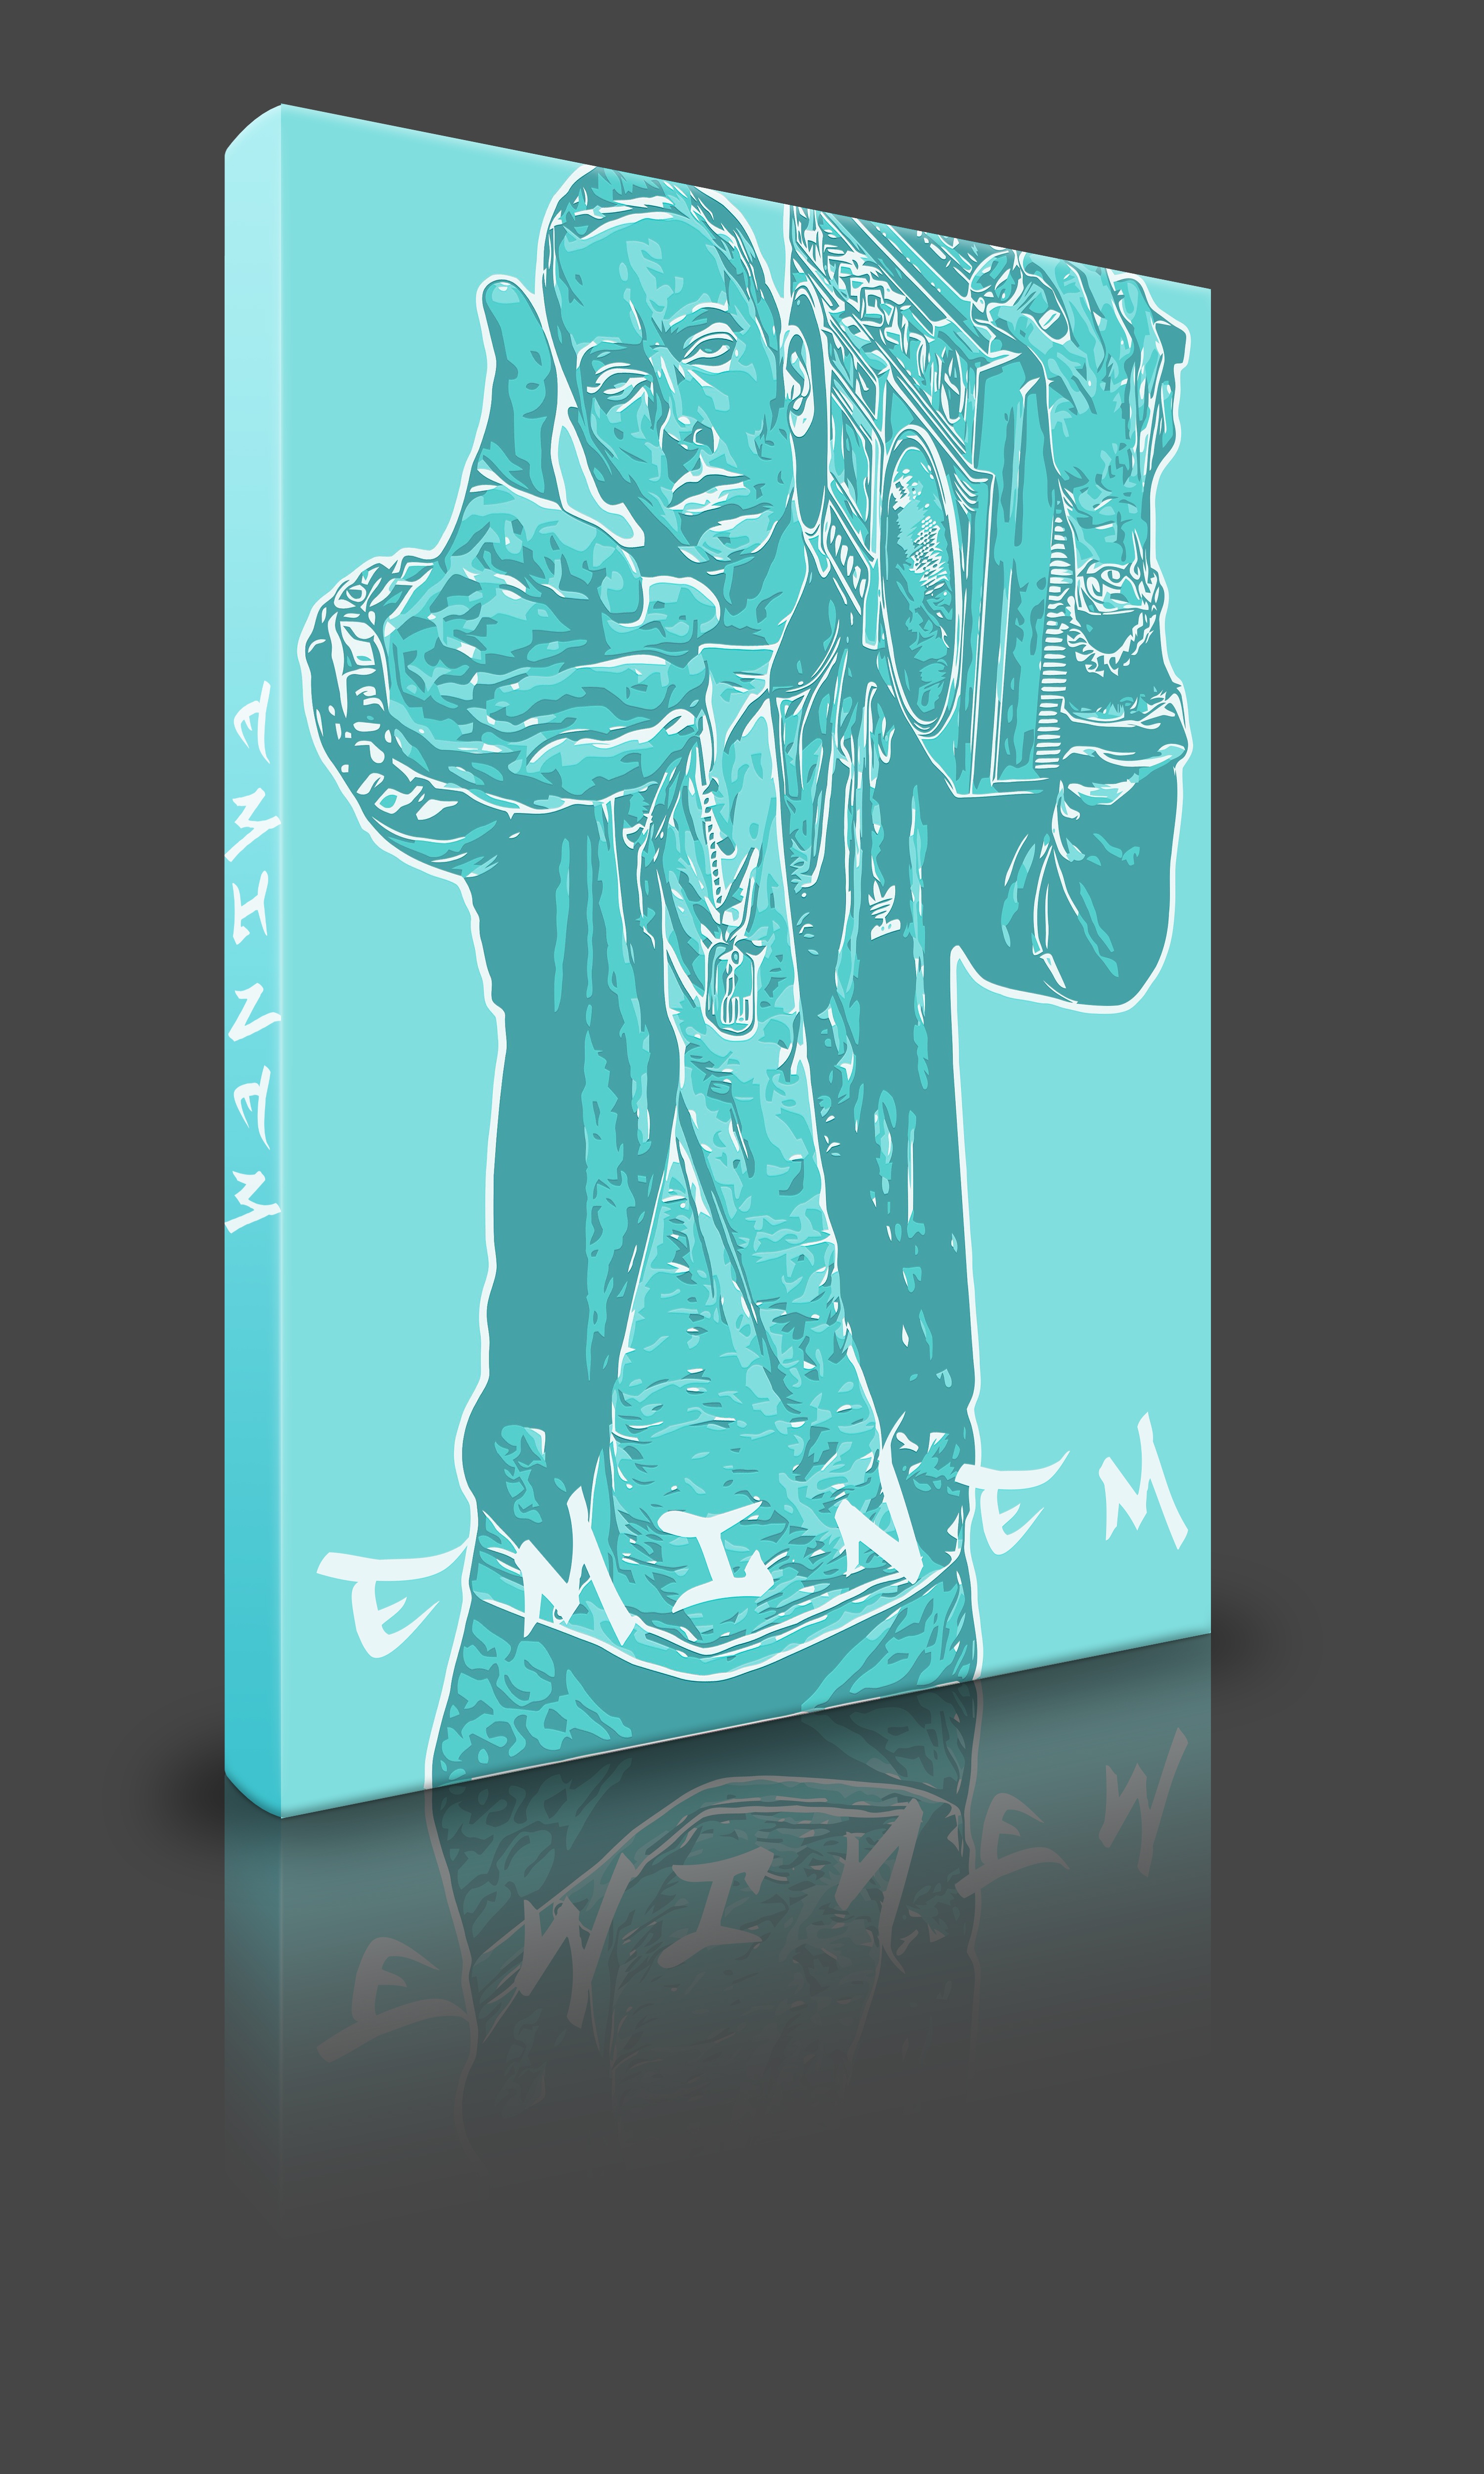 Eminem: Recovery box cover